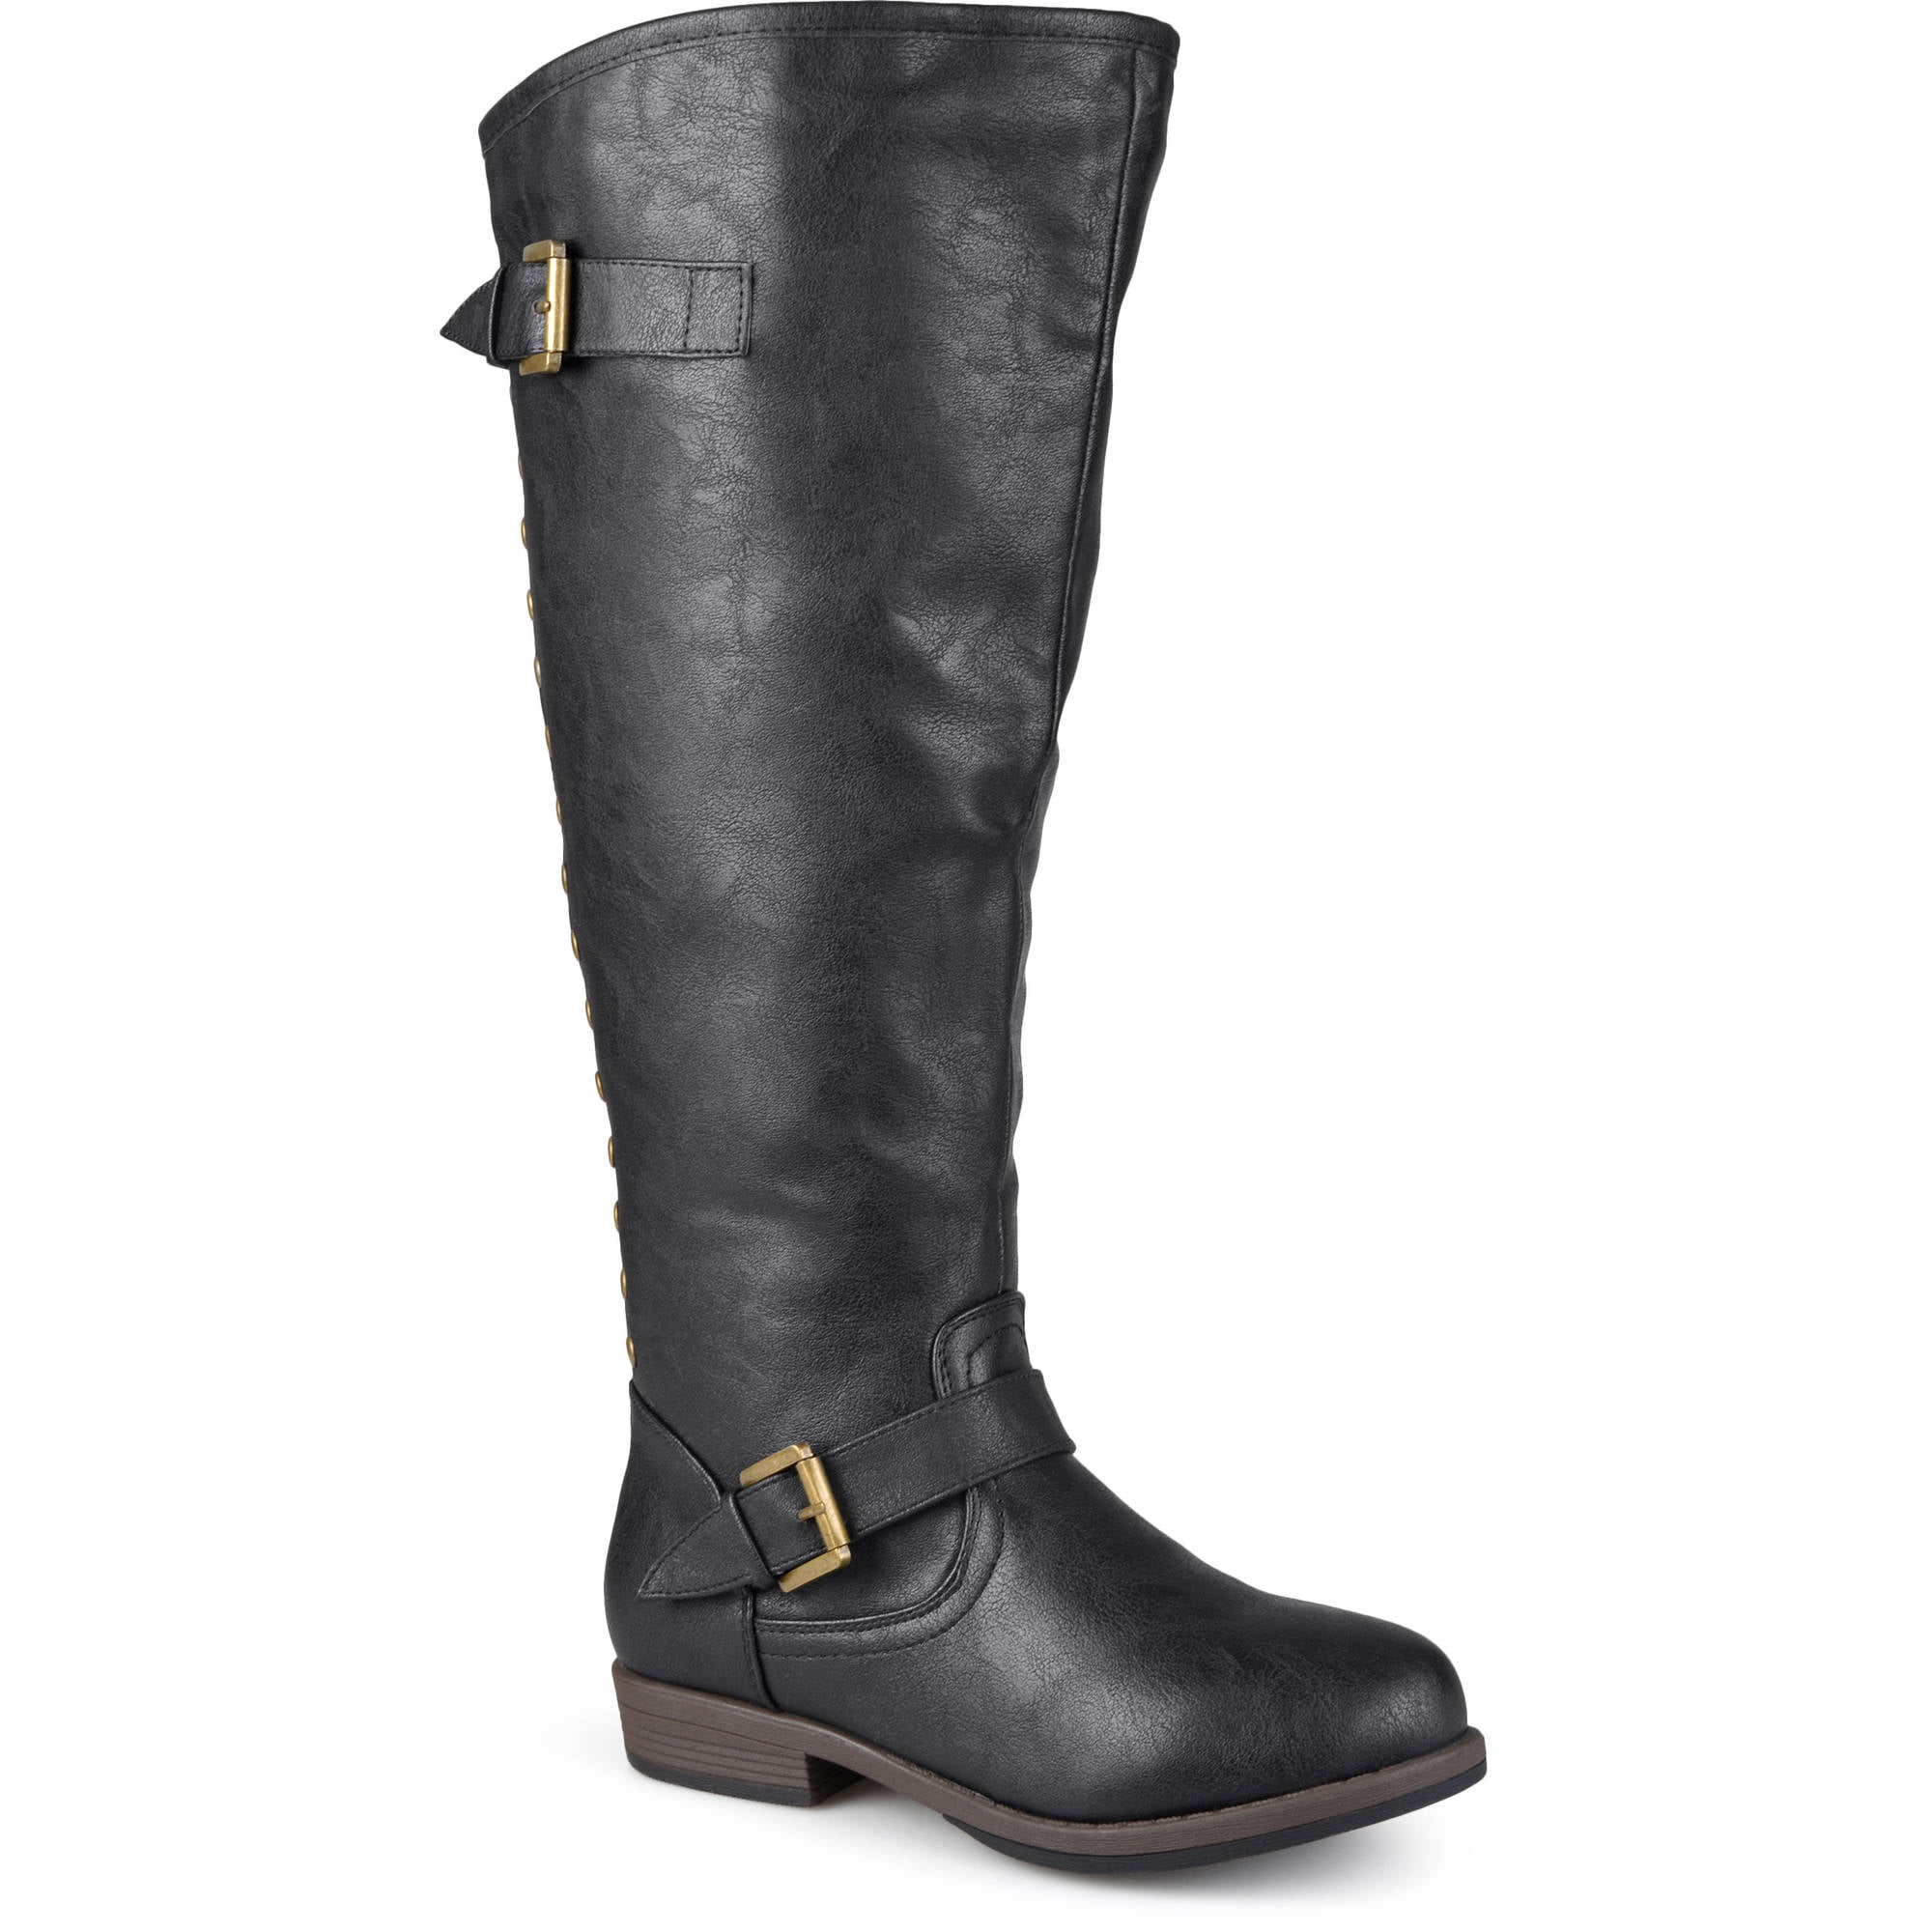 Inch wide calf boots